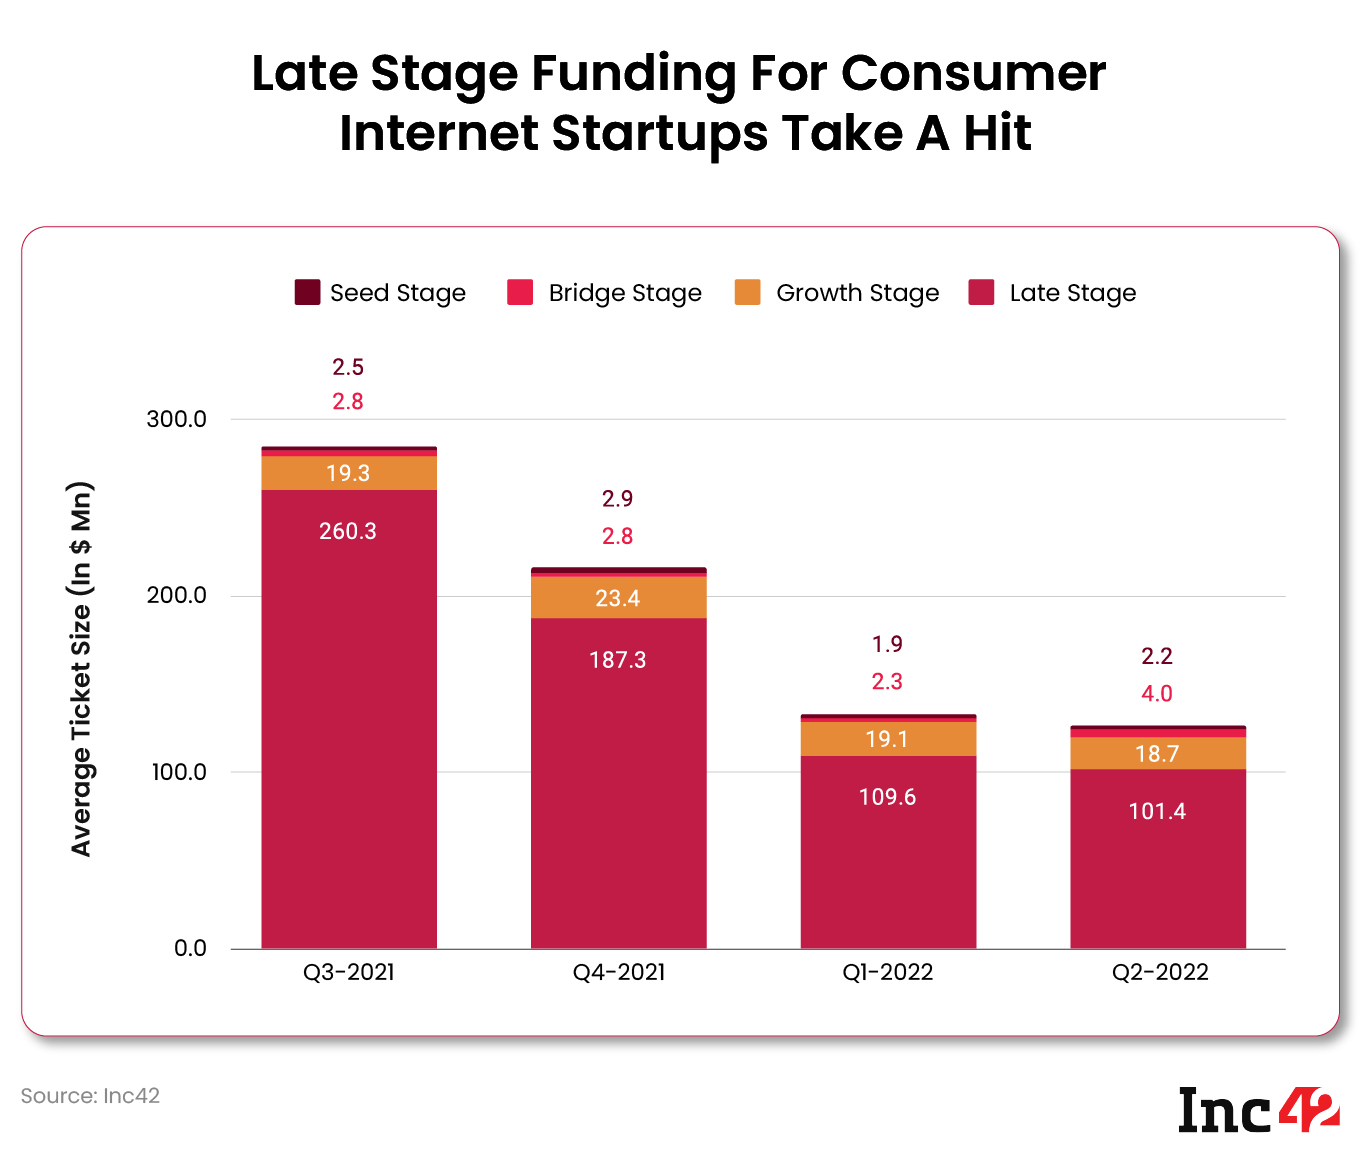 Late Stage Consumer Internet Startups' Average Funding Drops